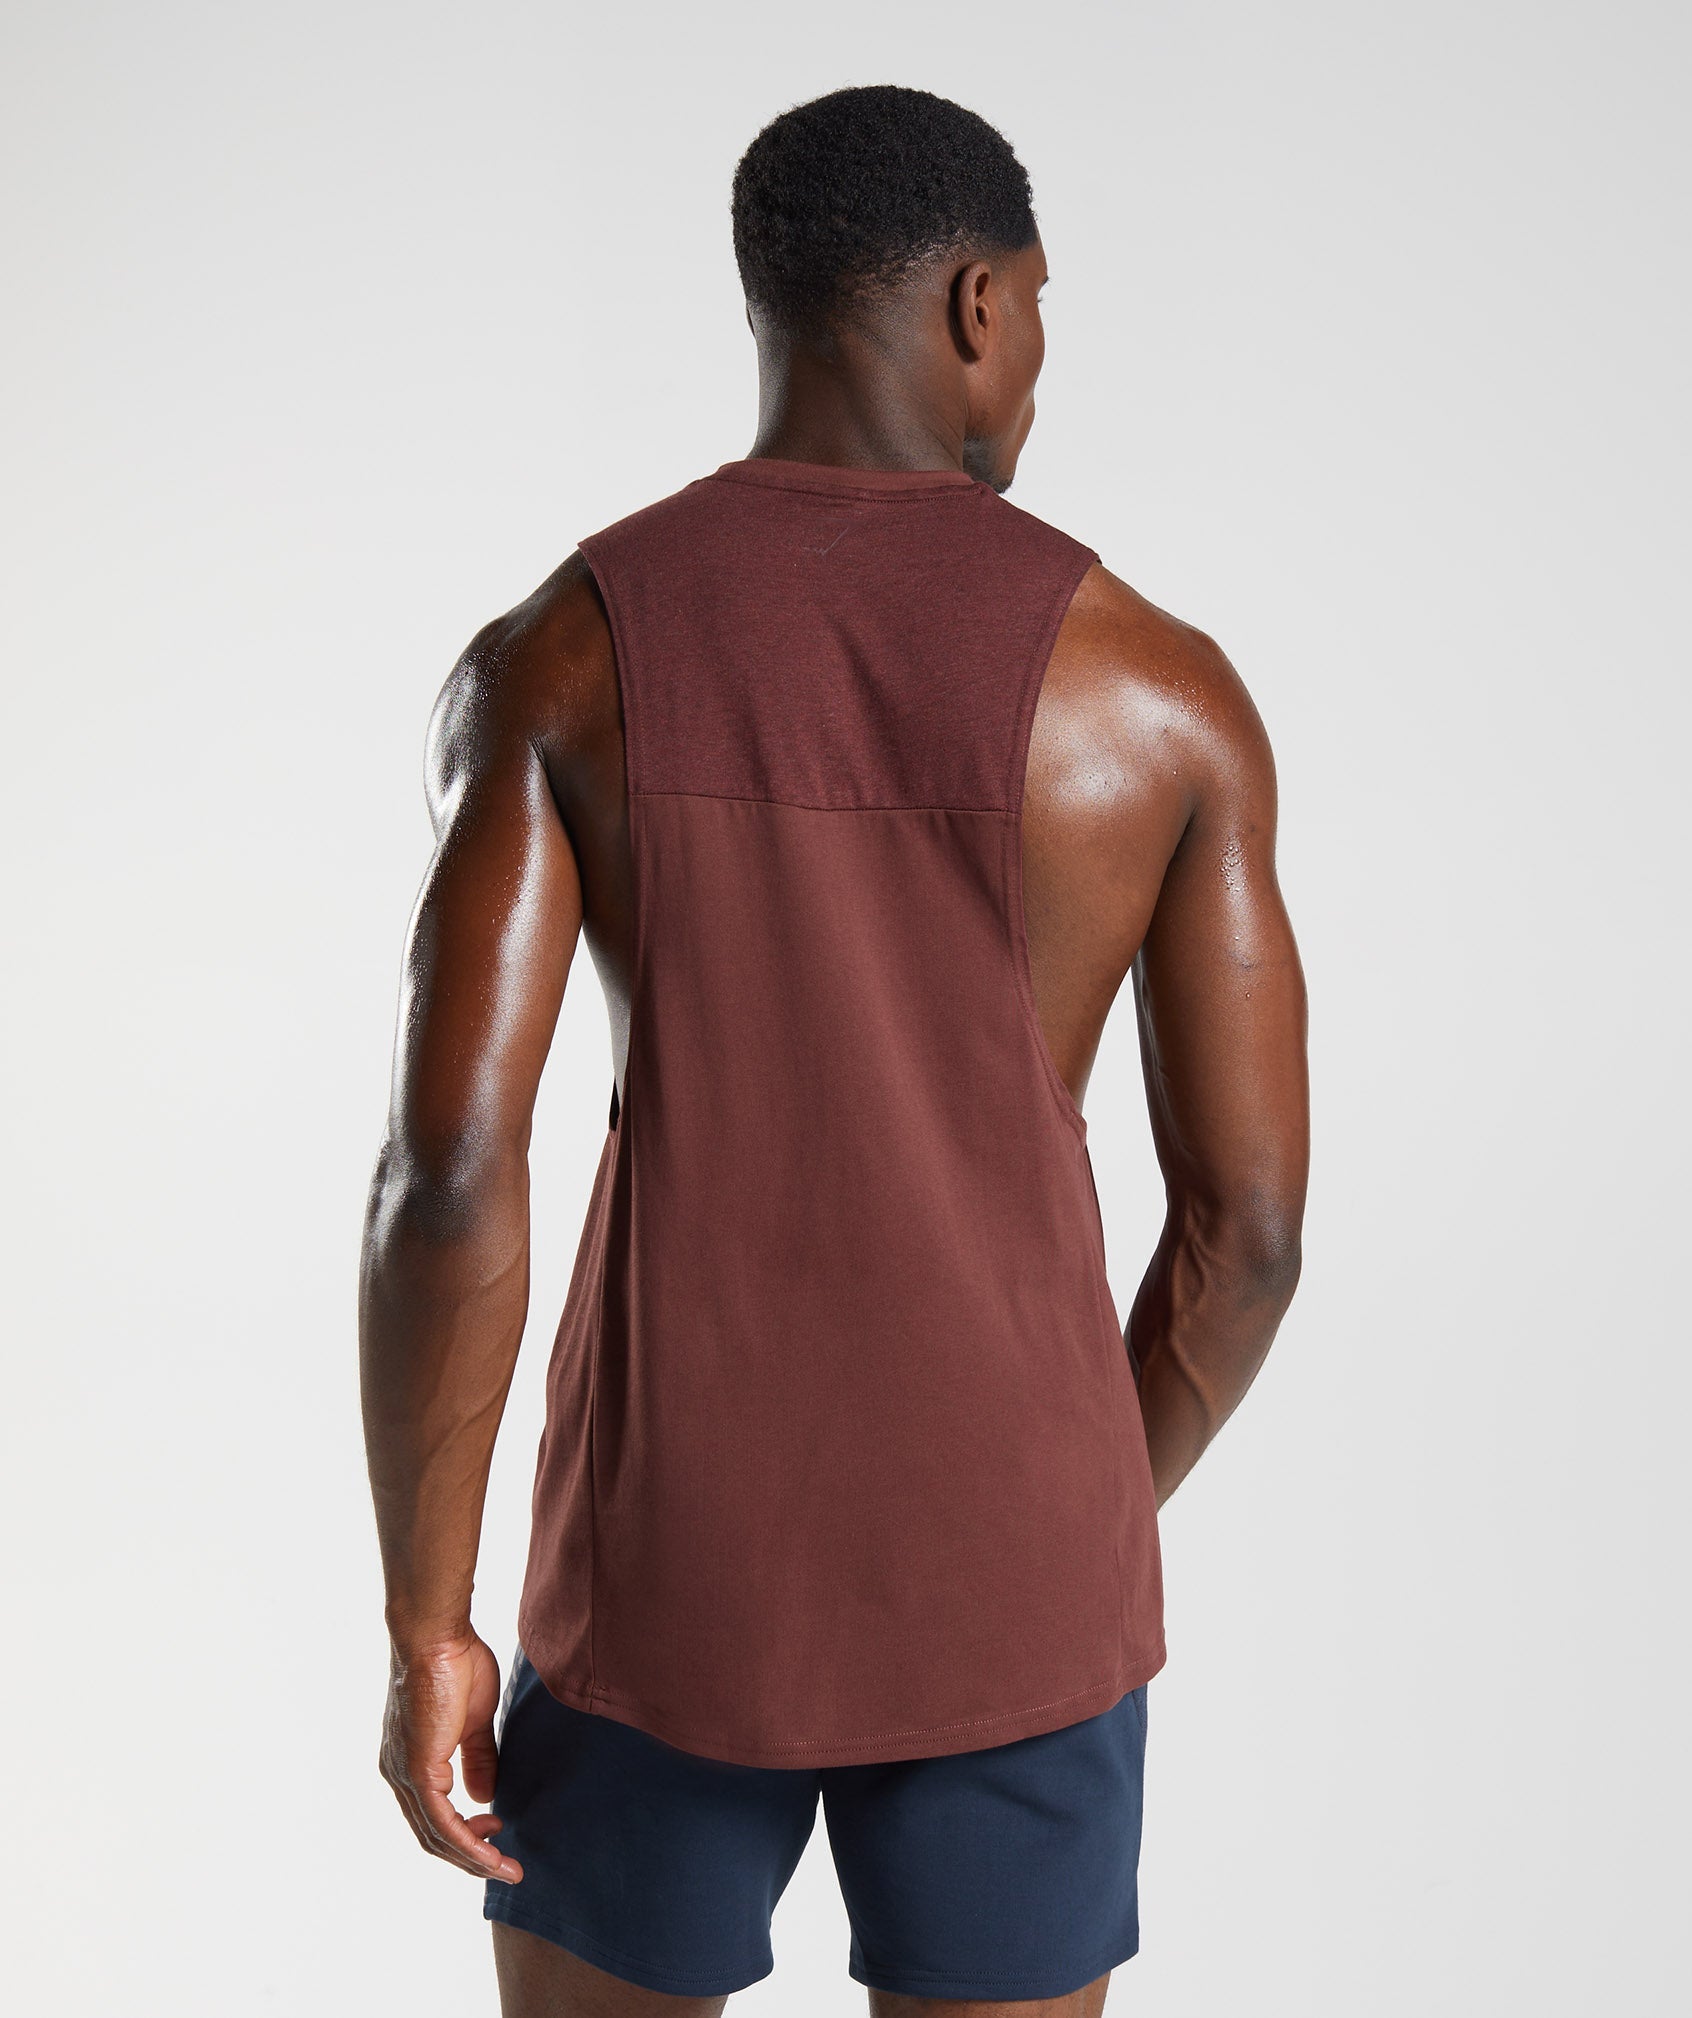 Bold React Drop Arm Tank in Cherry Brown - view 2